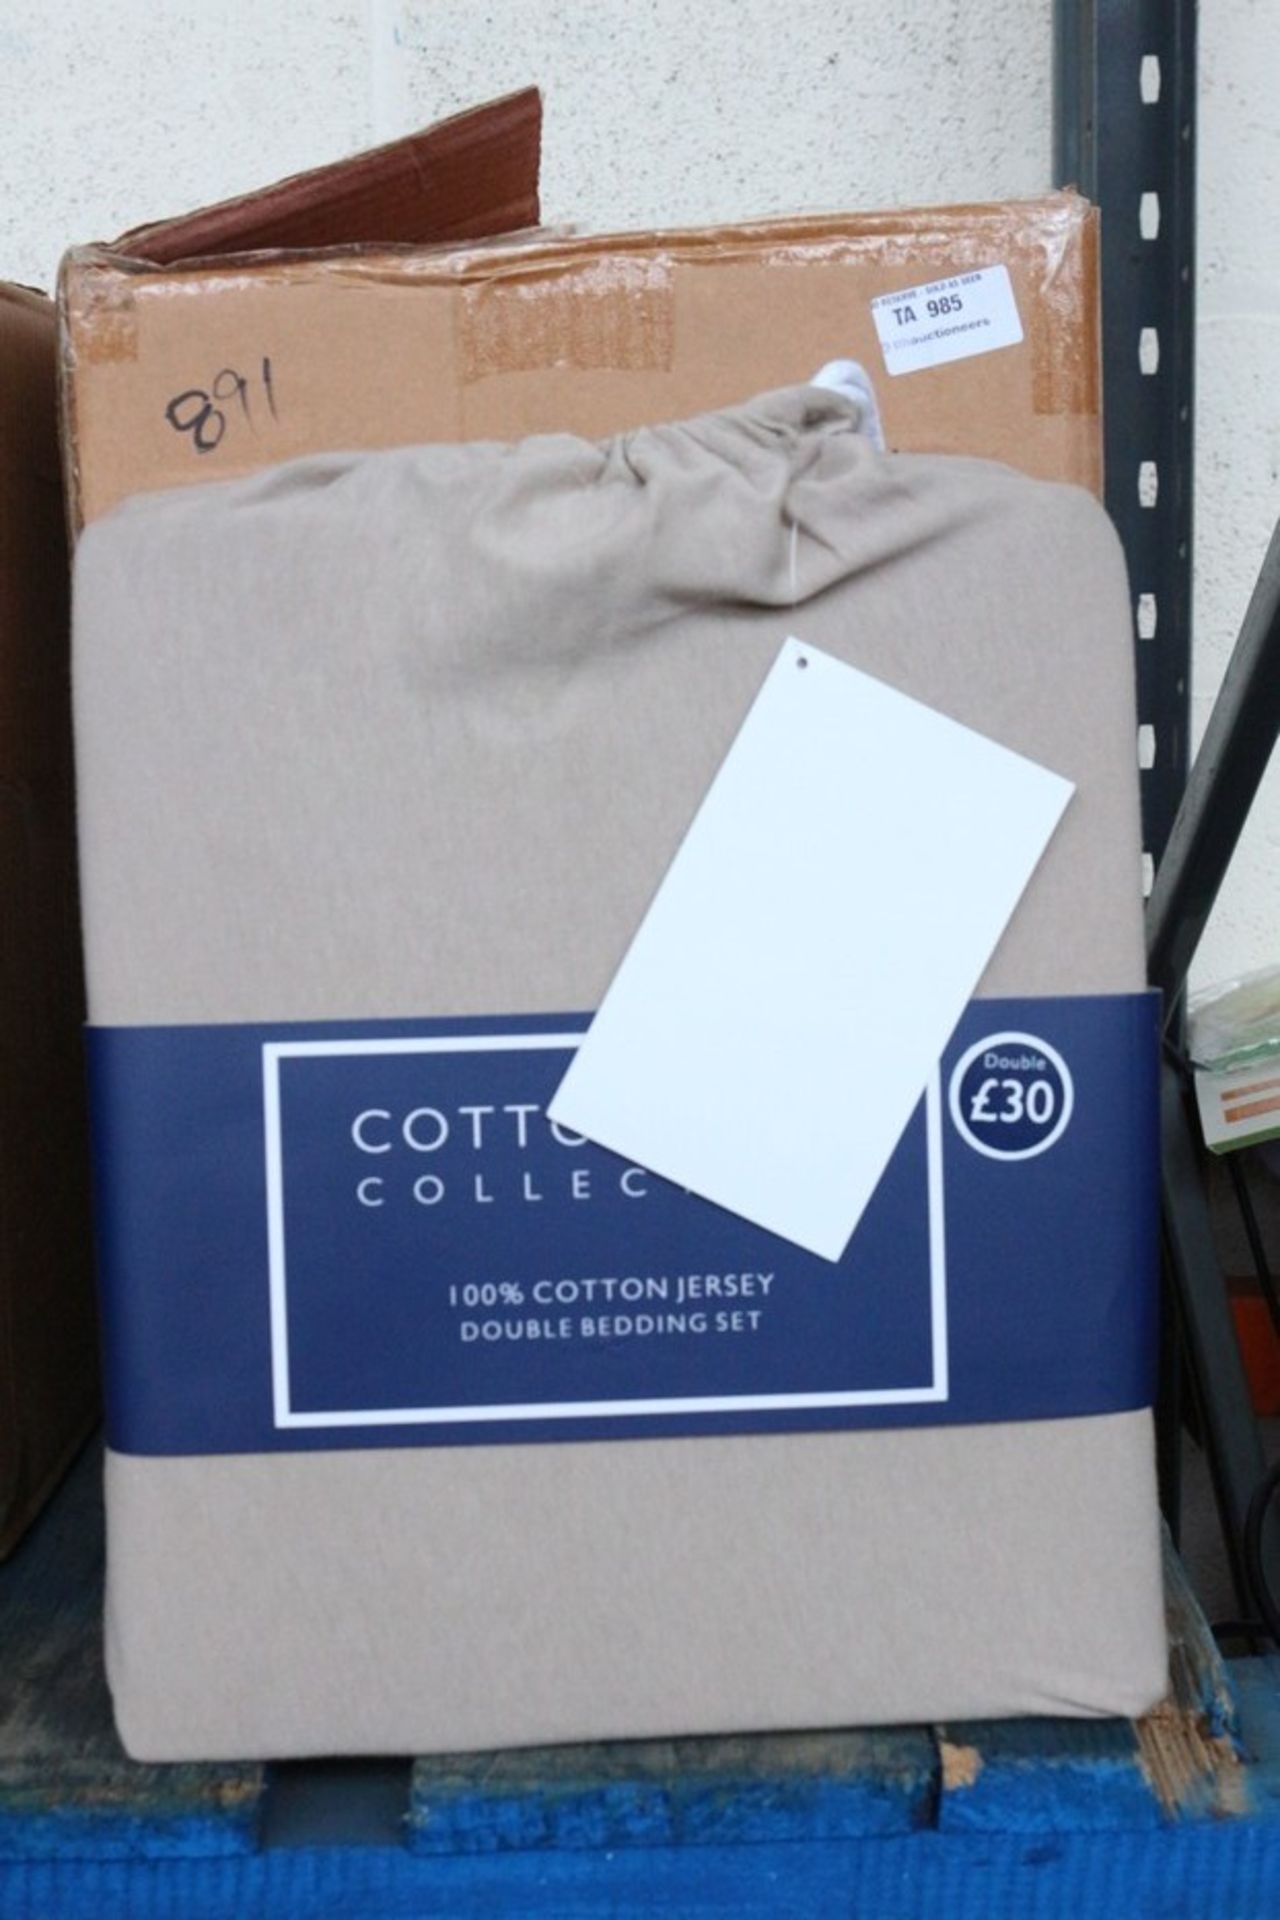 1X BOX TO CONTAIN 4 BRAND NEW 100% COTTON JERSEY DOUBLE BEDDING SETS RRP £30 EACH (TW-CQ)